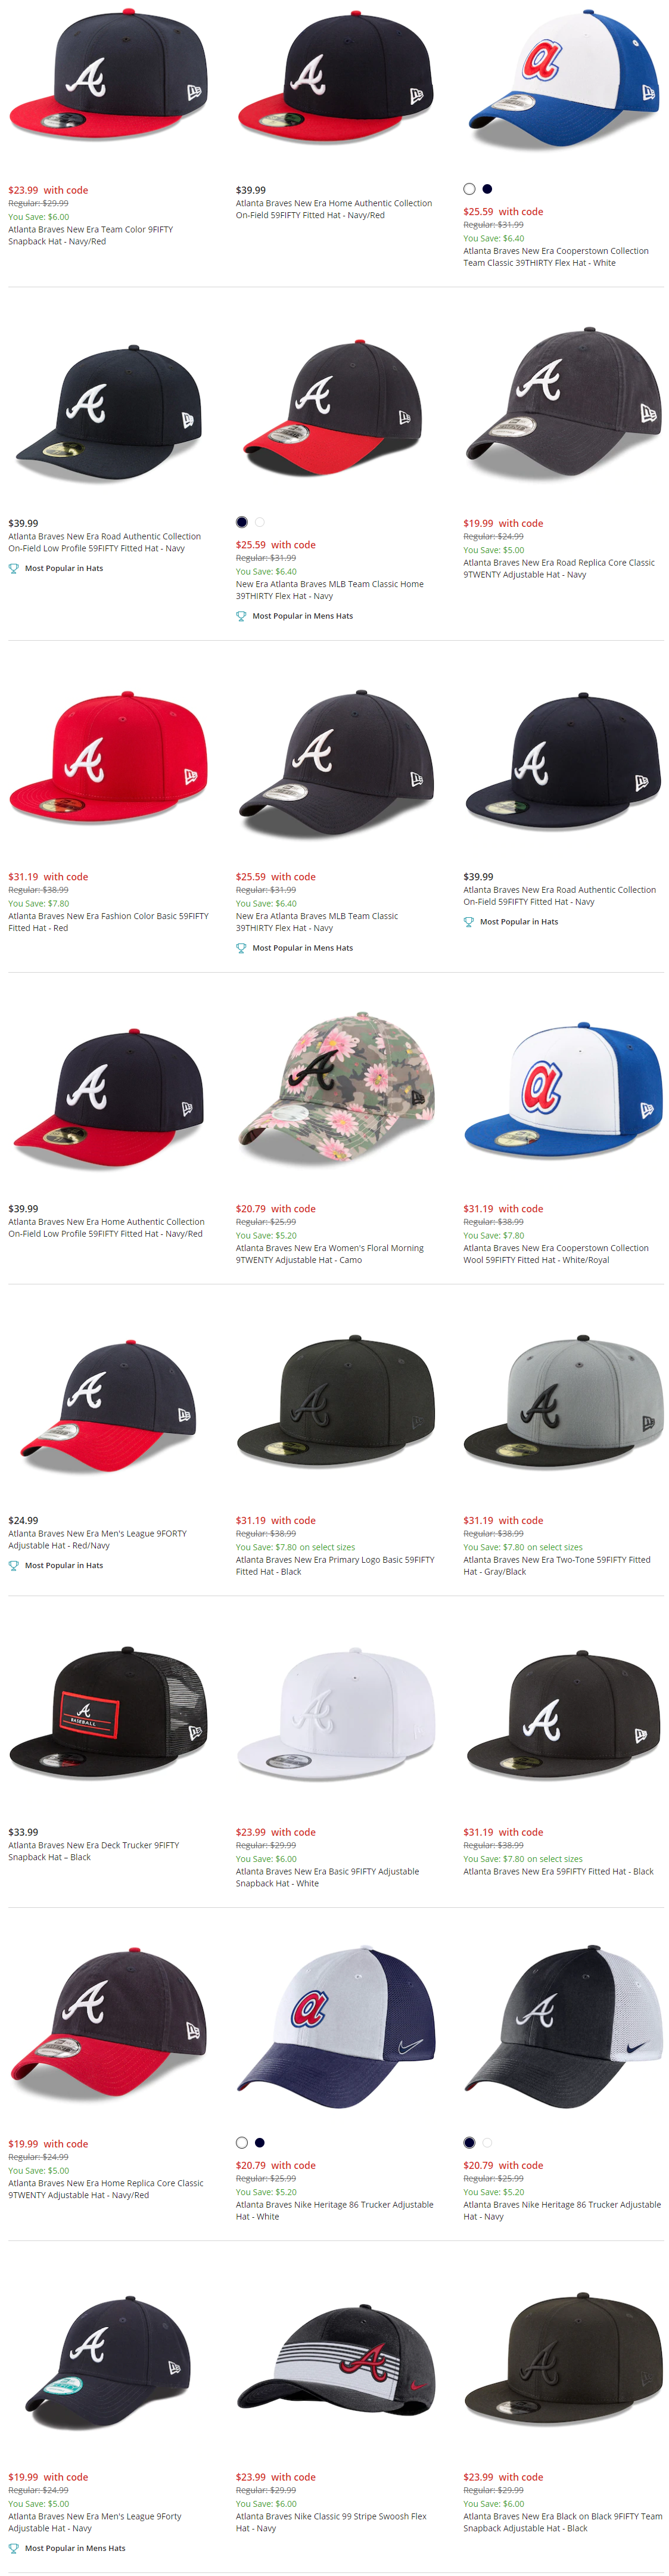 http://www.majorbaseballhats.com/wp-content/uploads/2020/08/atlanta-braves-hats-of-all-kinds-from-around-the-country.png